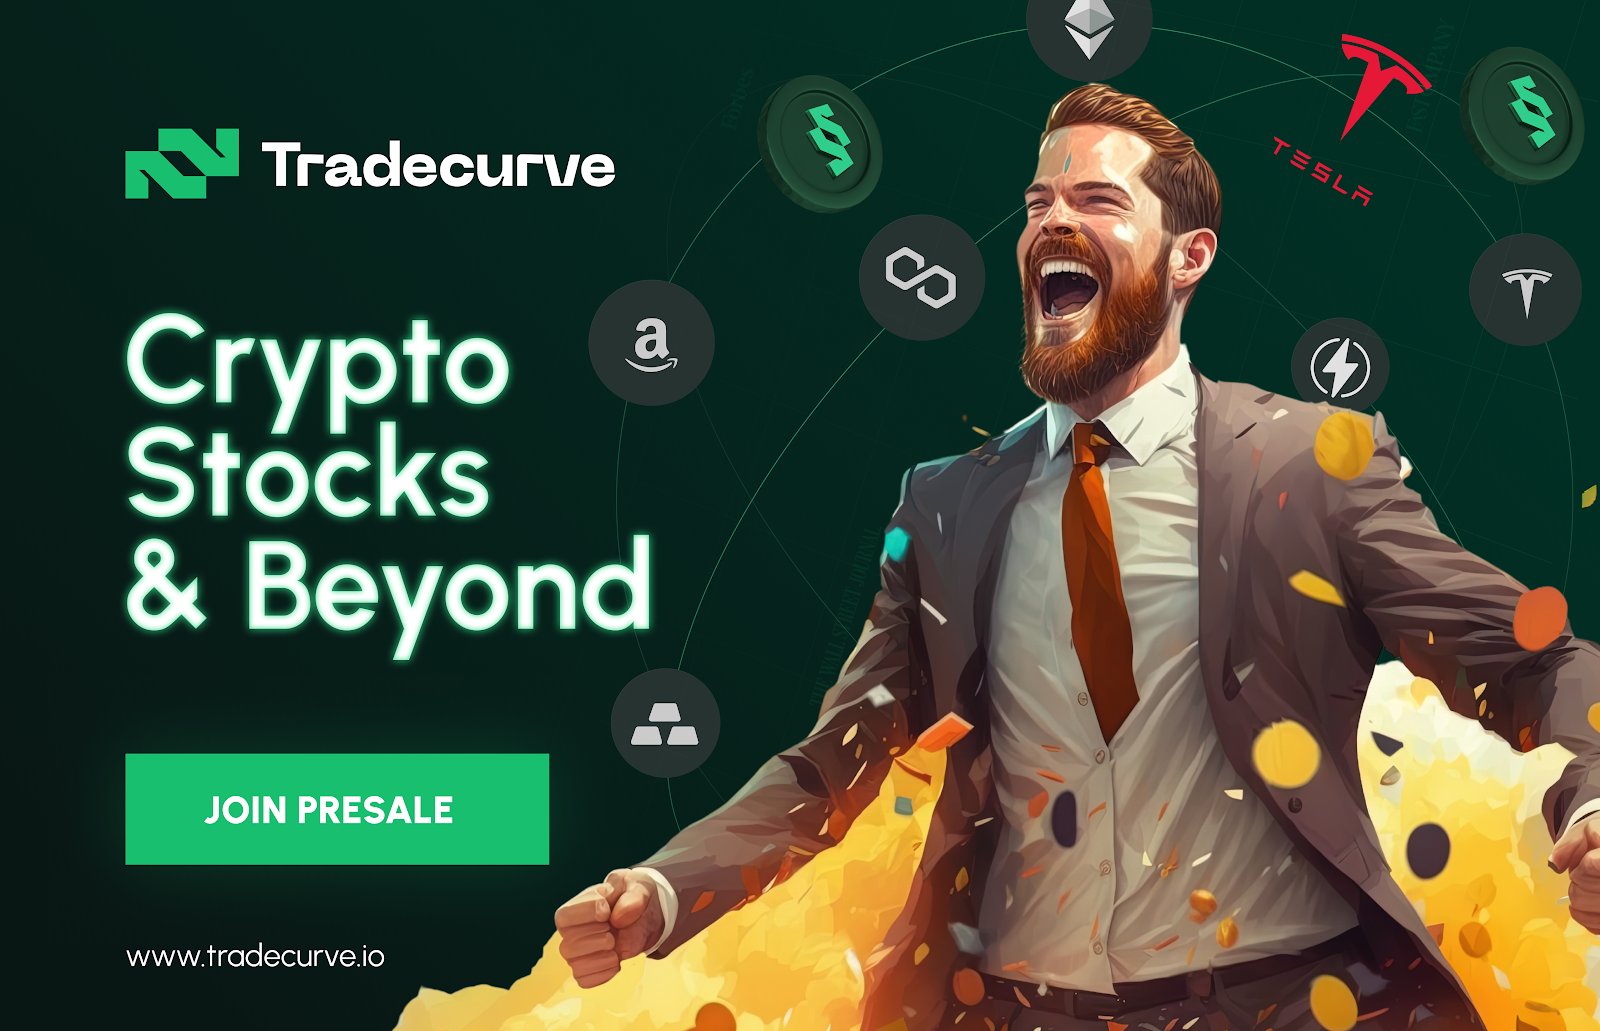 Tradecurve supported, Apecoin and Dogecoin holder count falling - 1